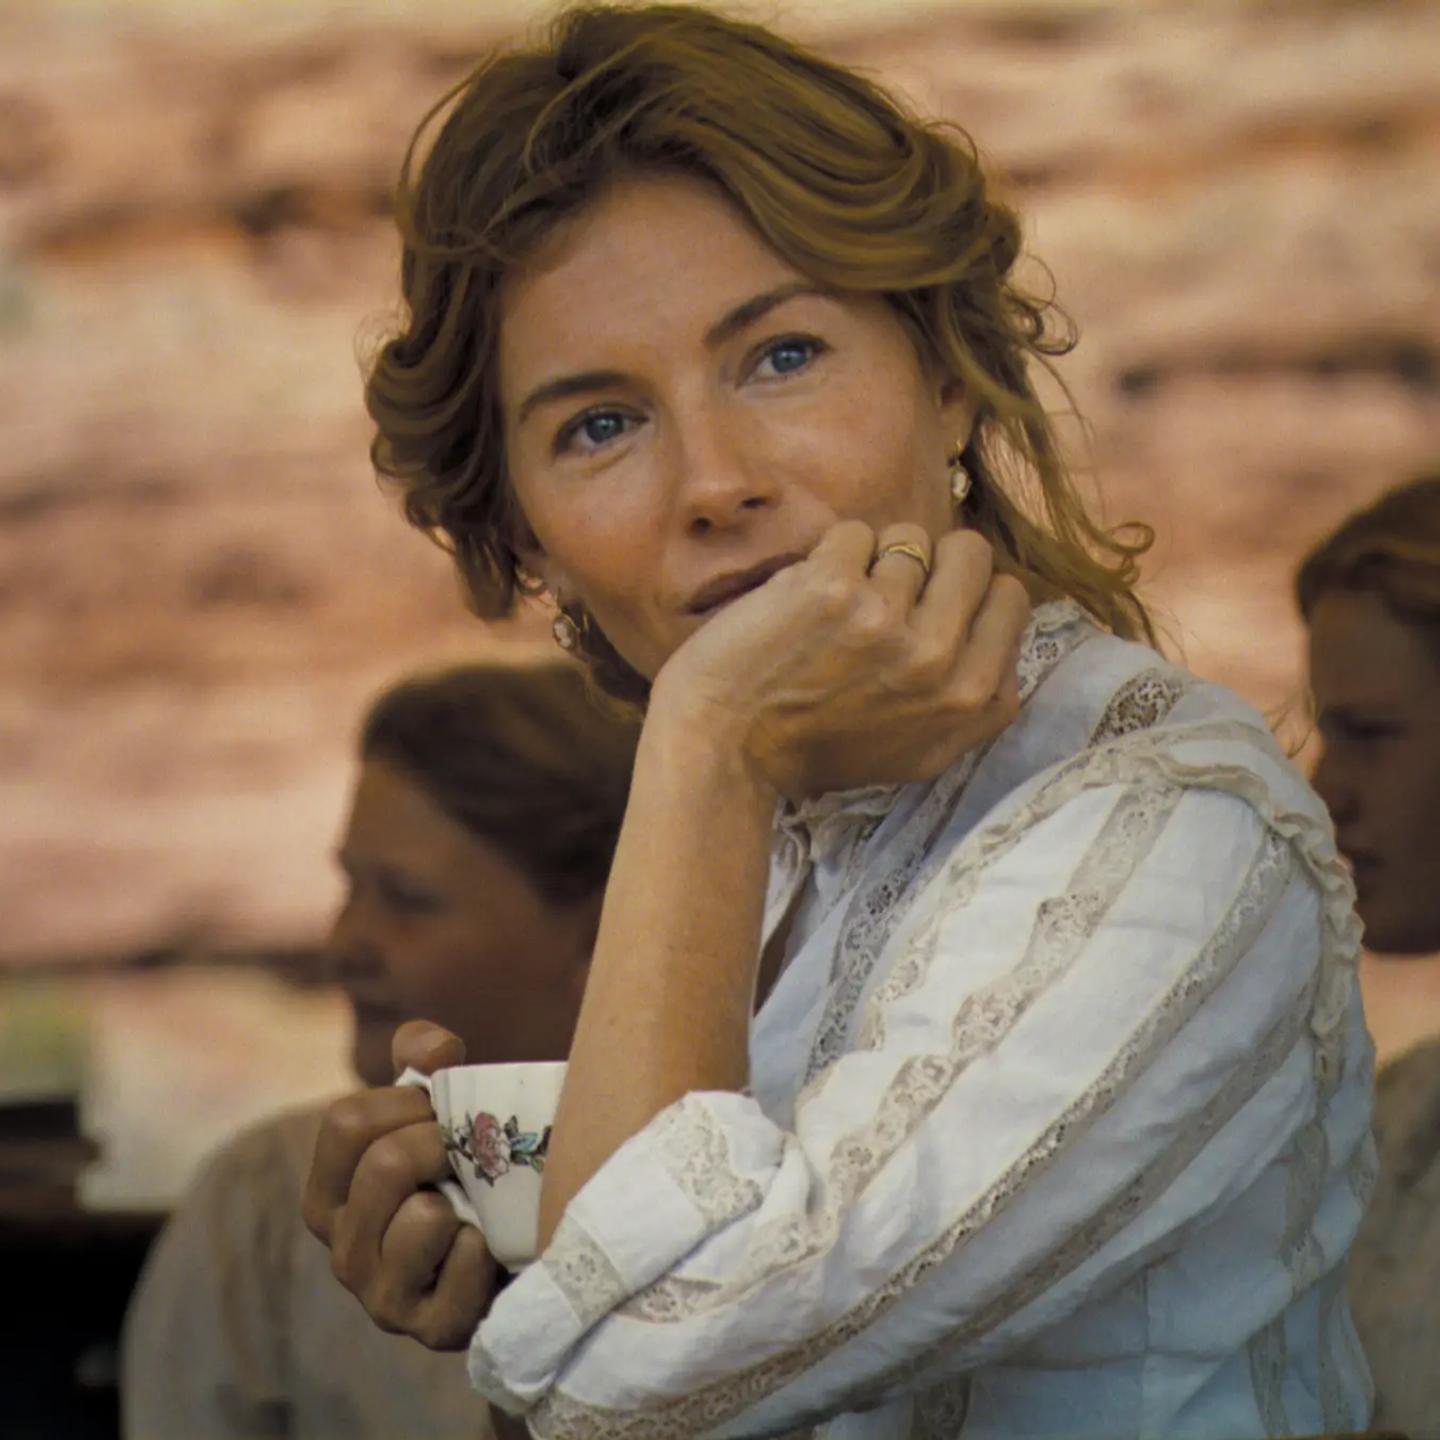 Sienna Miller holding a cup